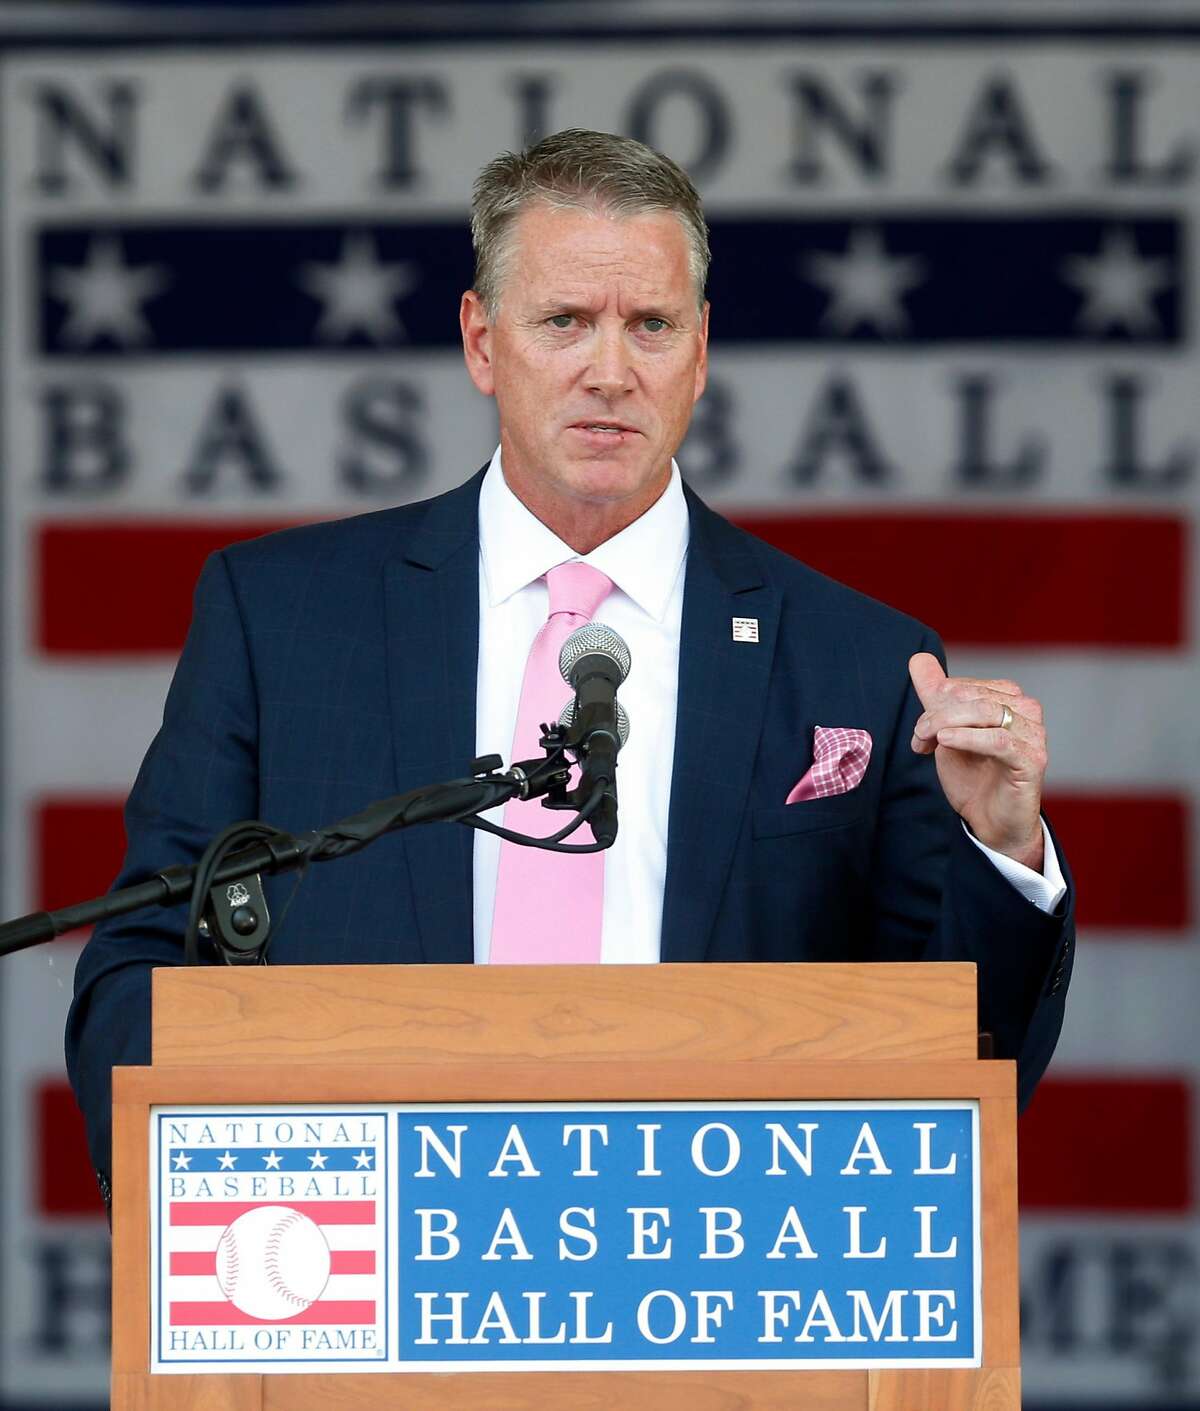 National Baseball Hall of Fame inductee Tom Glavine speaks during an induction ceremony at the Clark Sports Center on Sunday, July 27, 2014, in Cooperstown, N.Y. (AP Photo/Mike Groll)